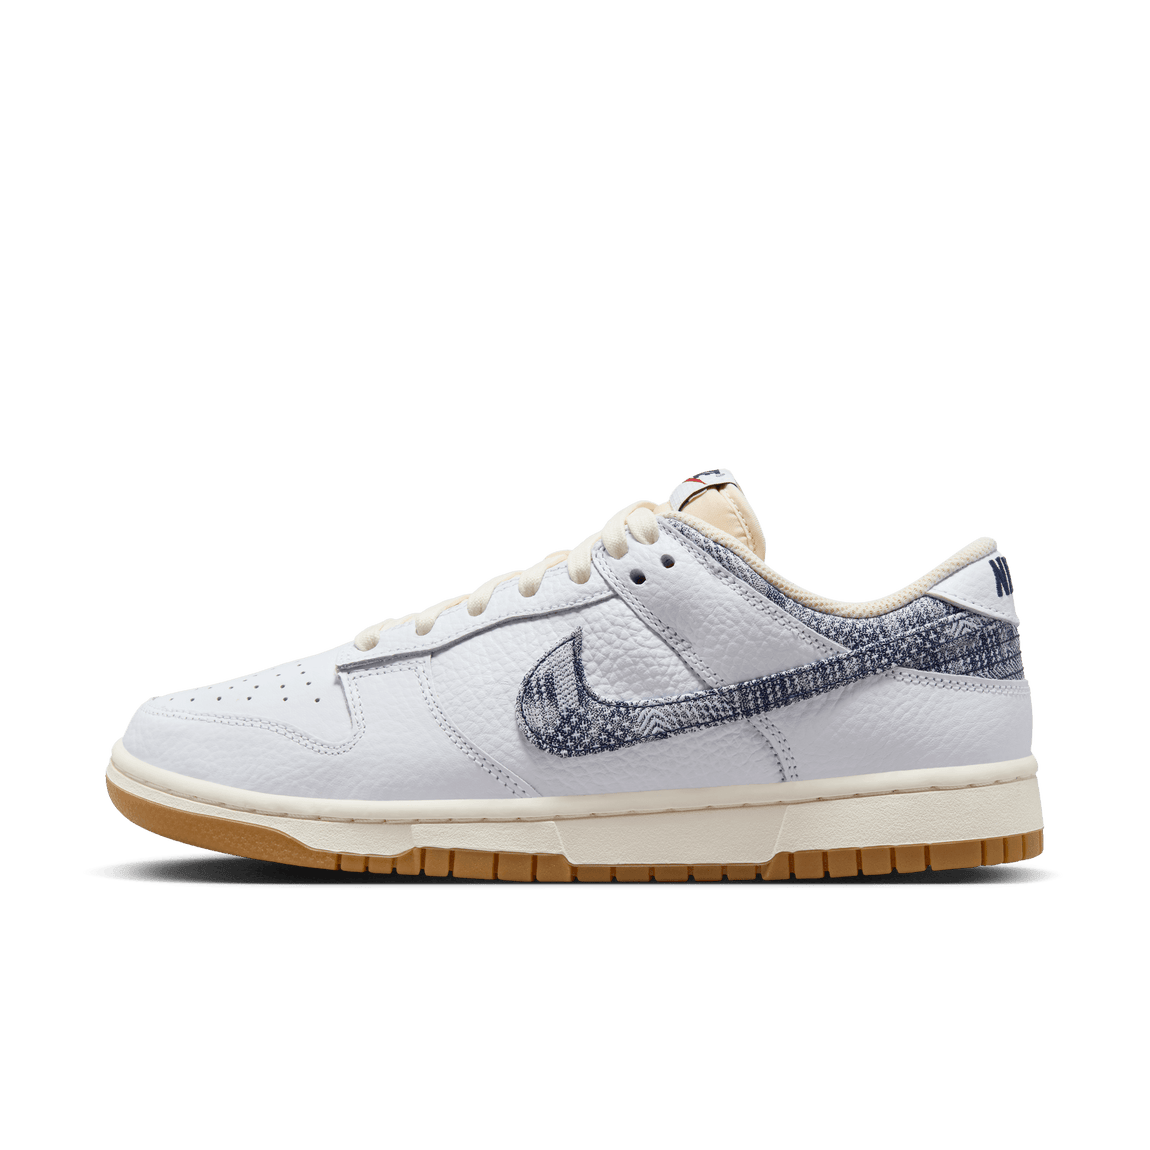 Nike Dunk Low ( White / Midnight Navy / Gym Red / Sail ) - Nike Dunk Low ( White / Midnight Navy / Gym Red / Sail ) - 